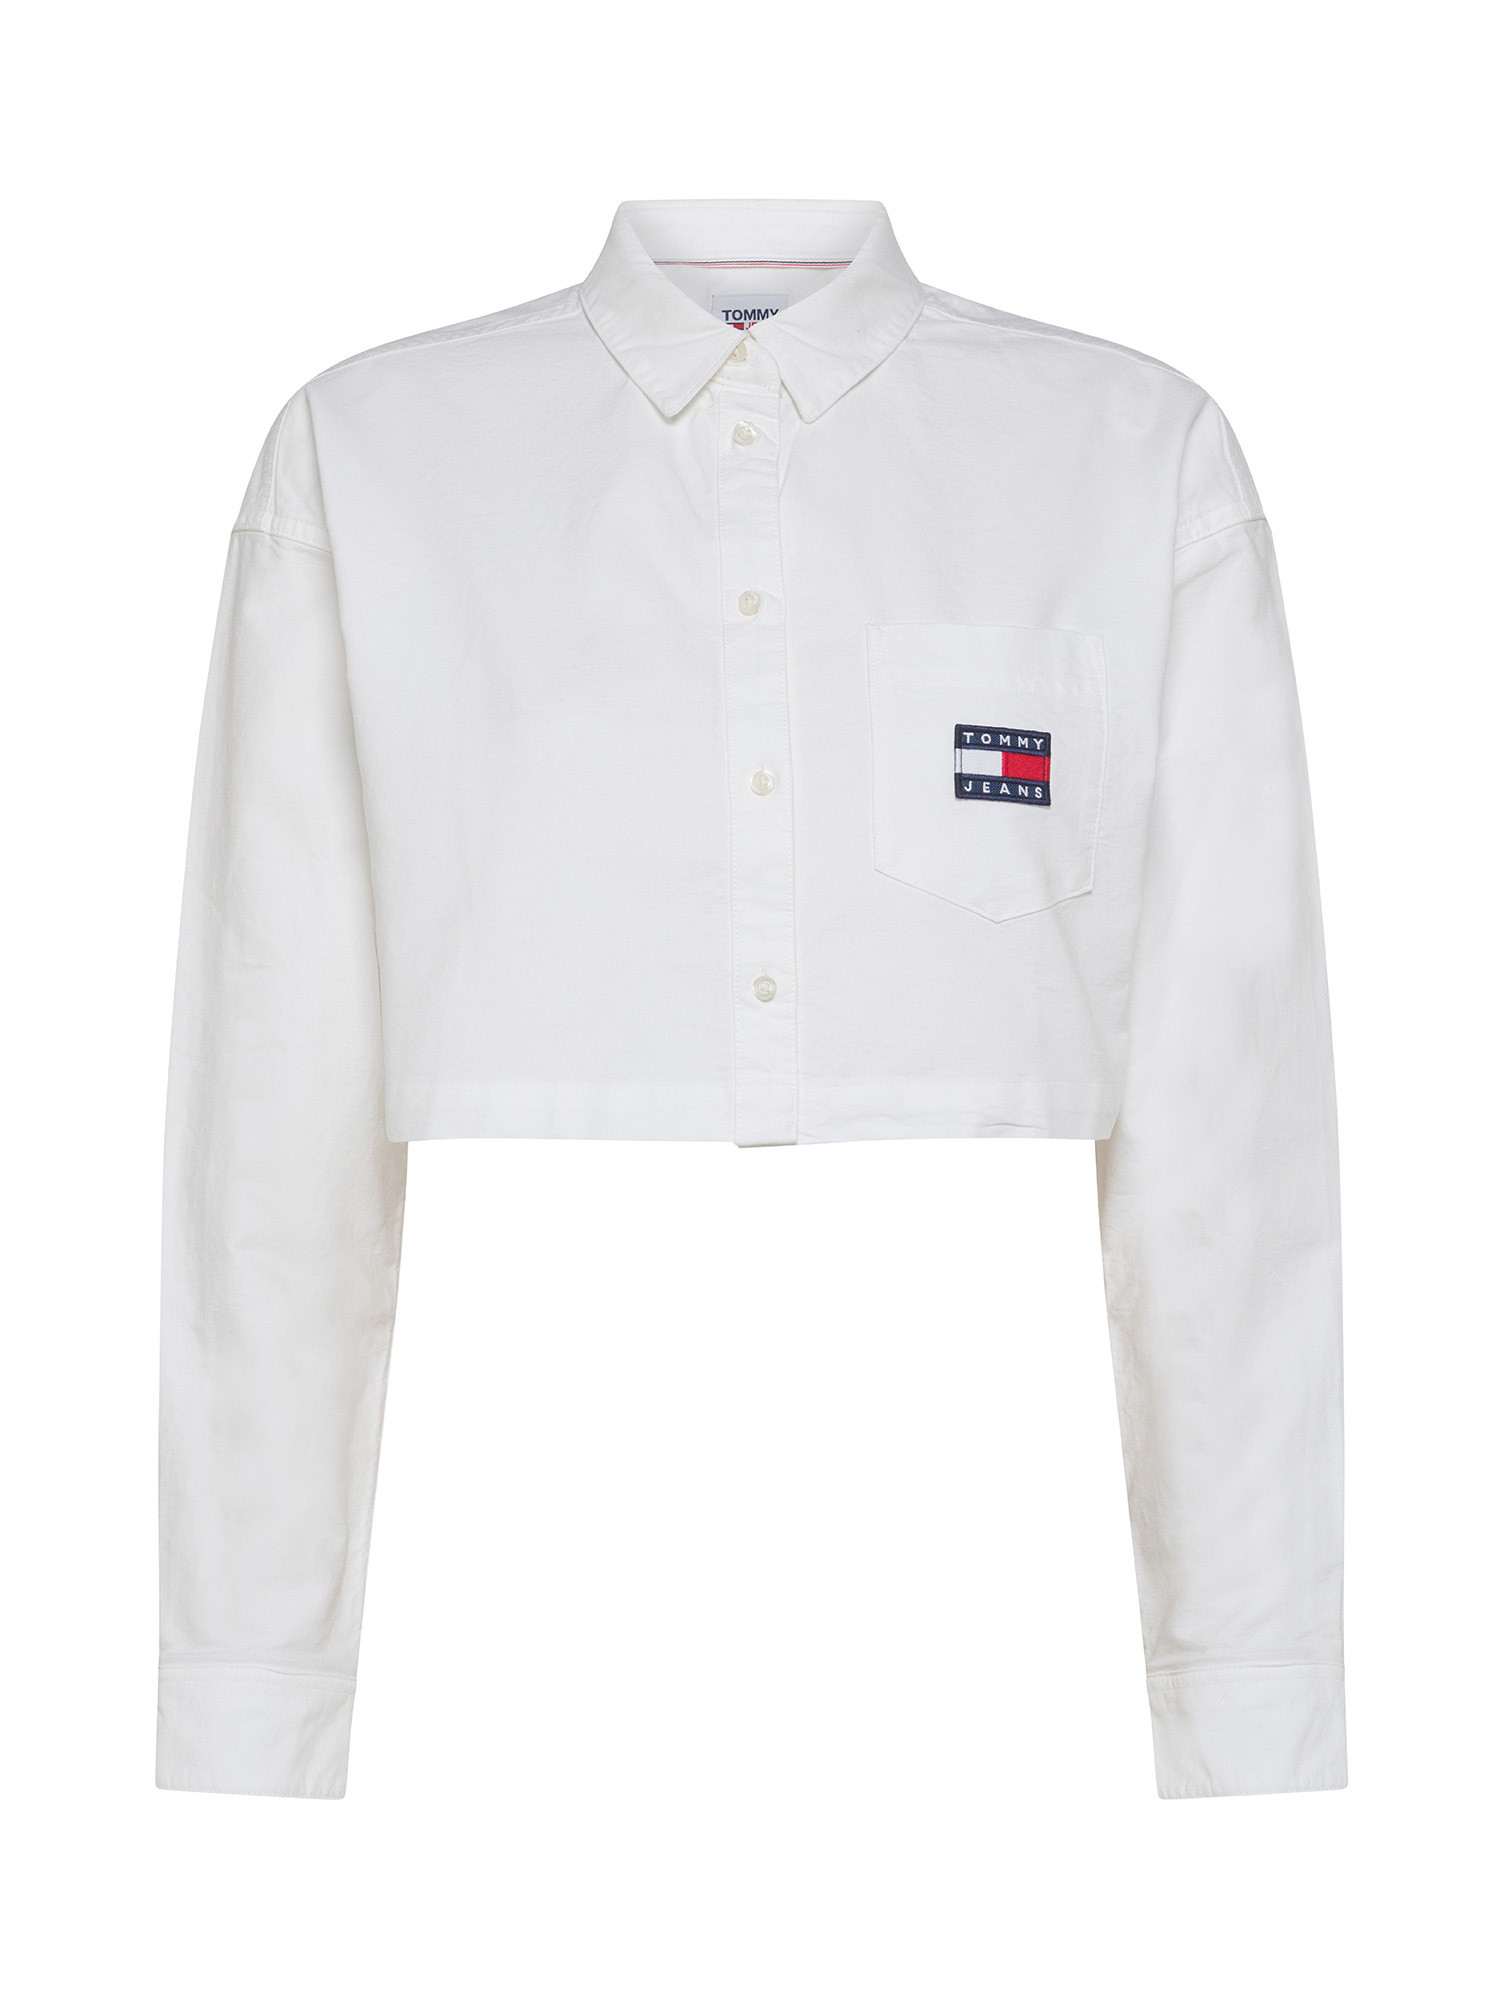 Tommy Jeans - Camicia cropped con logo sul taschino, Bianco, large image number 0